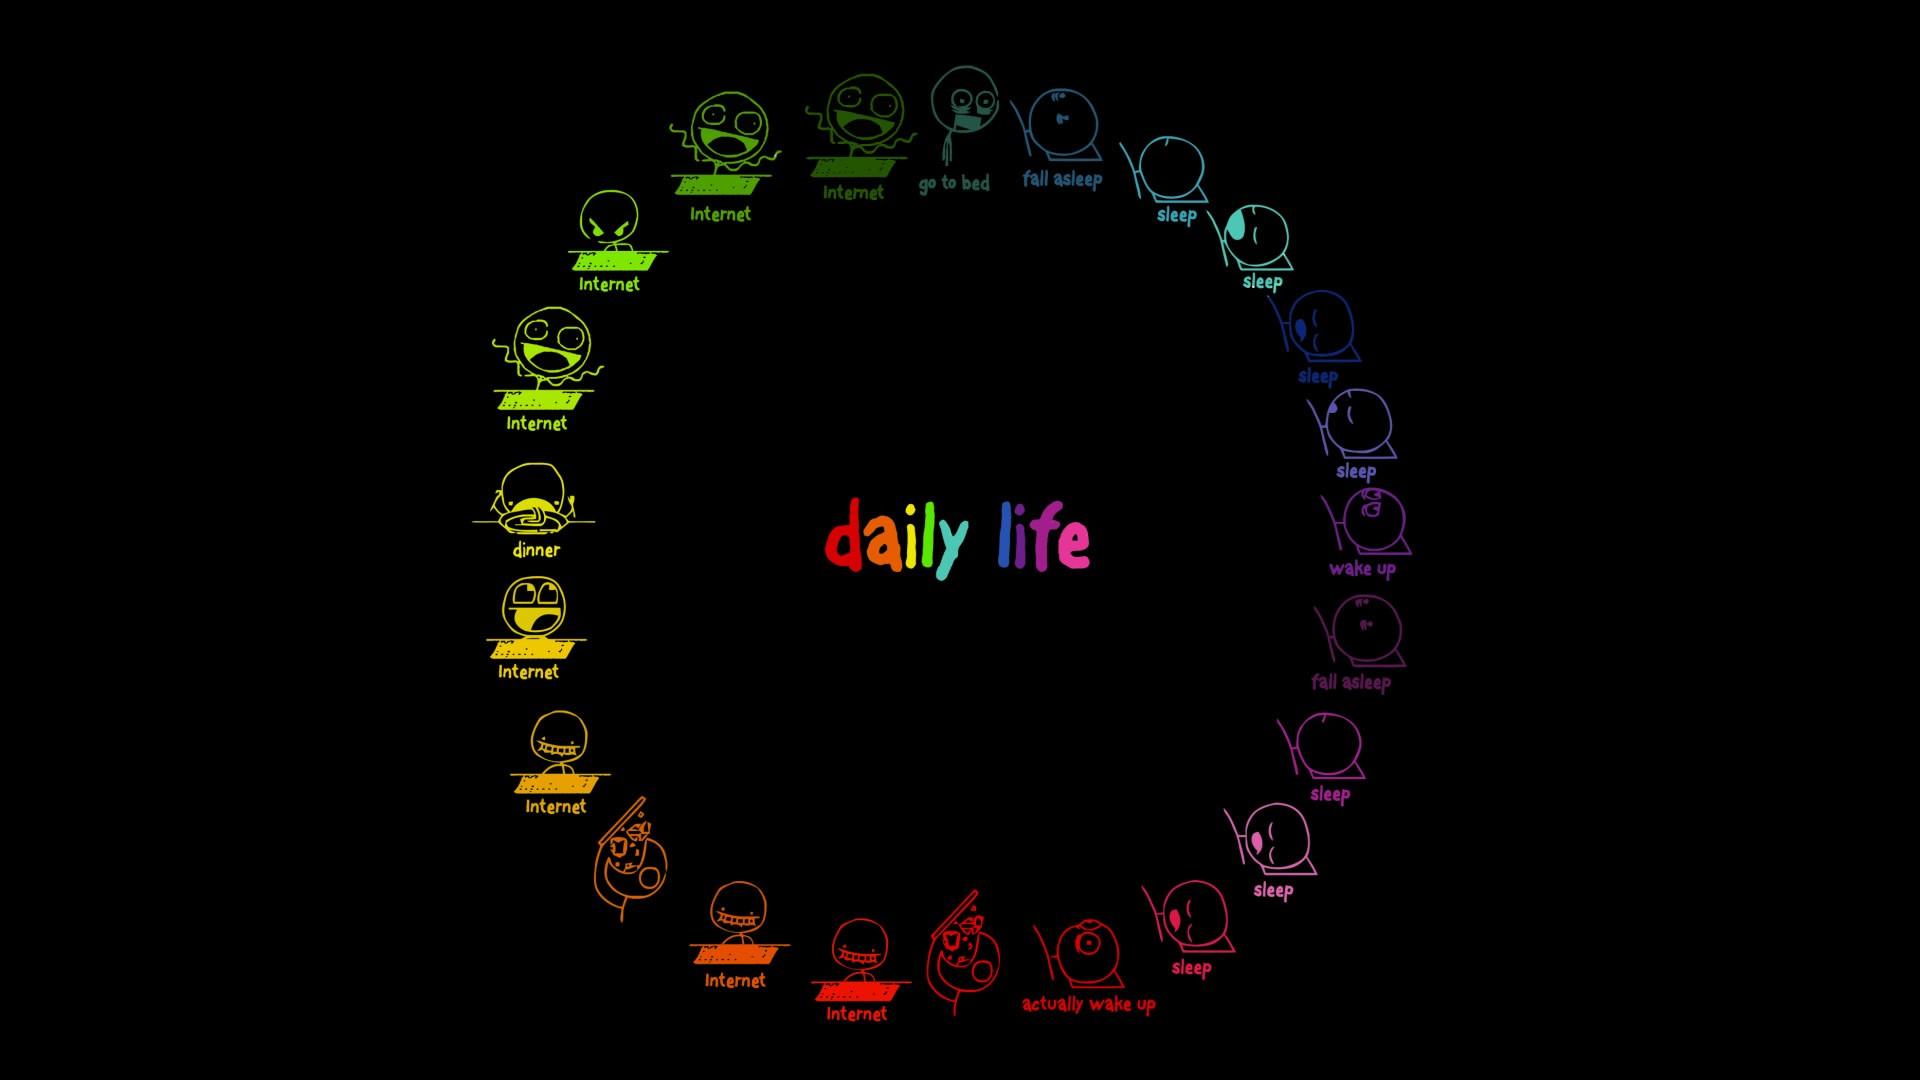 Download the Daily Life Wallpaper, Daily Life iPhone